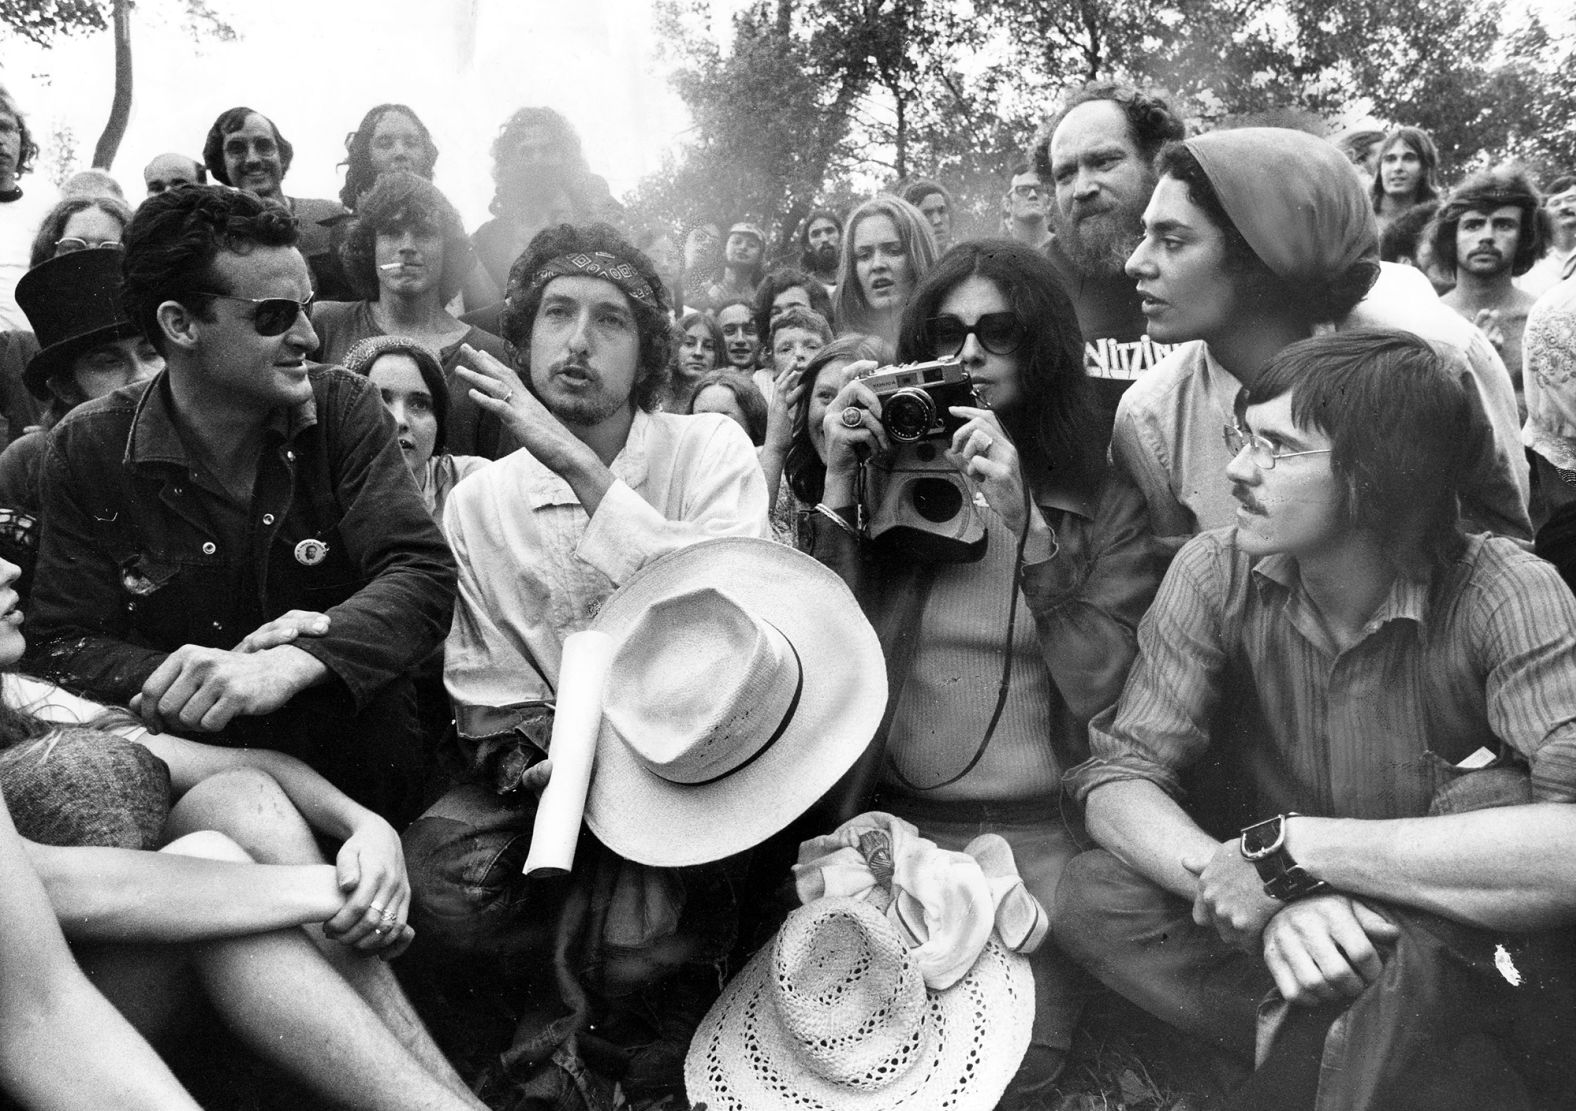 Dylan speaks at the Mariposa Folk Festival on Toronto's Olympic Island in 1972.